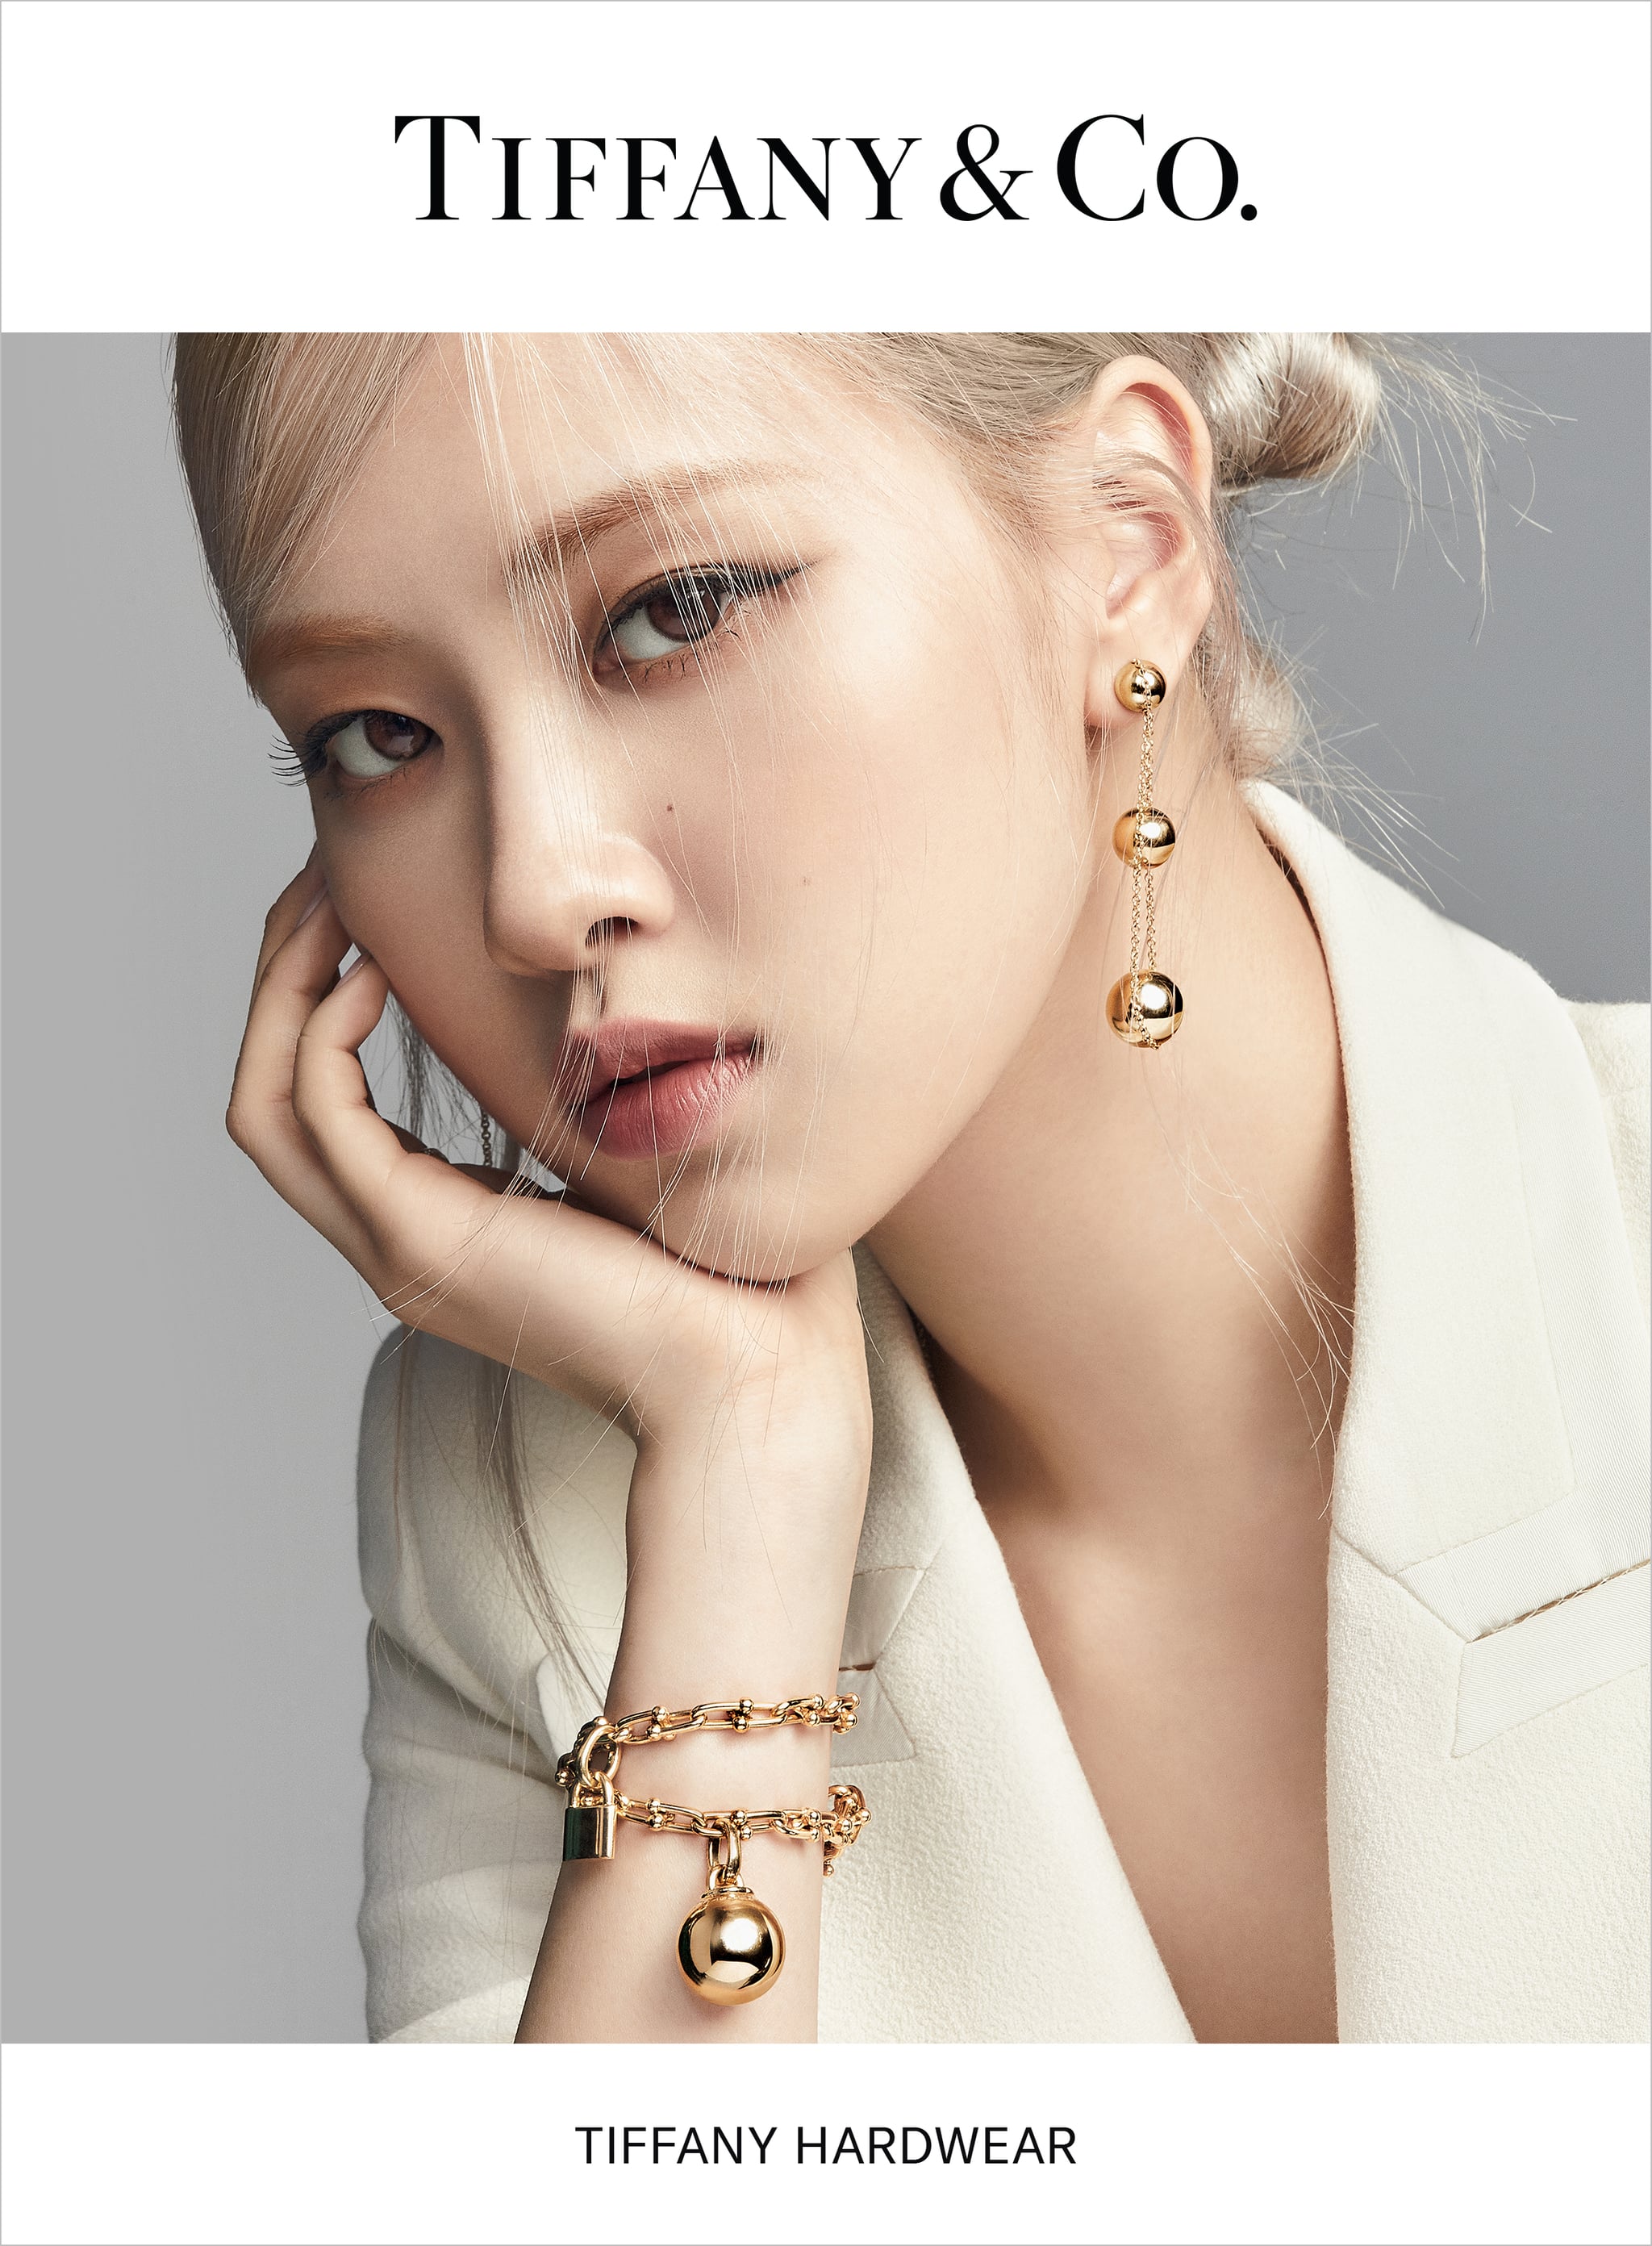 See Blackpink's Rosé in a New Tiffany & Co. Jewellery Campaign